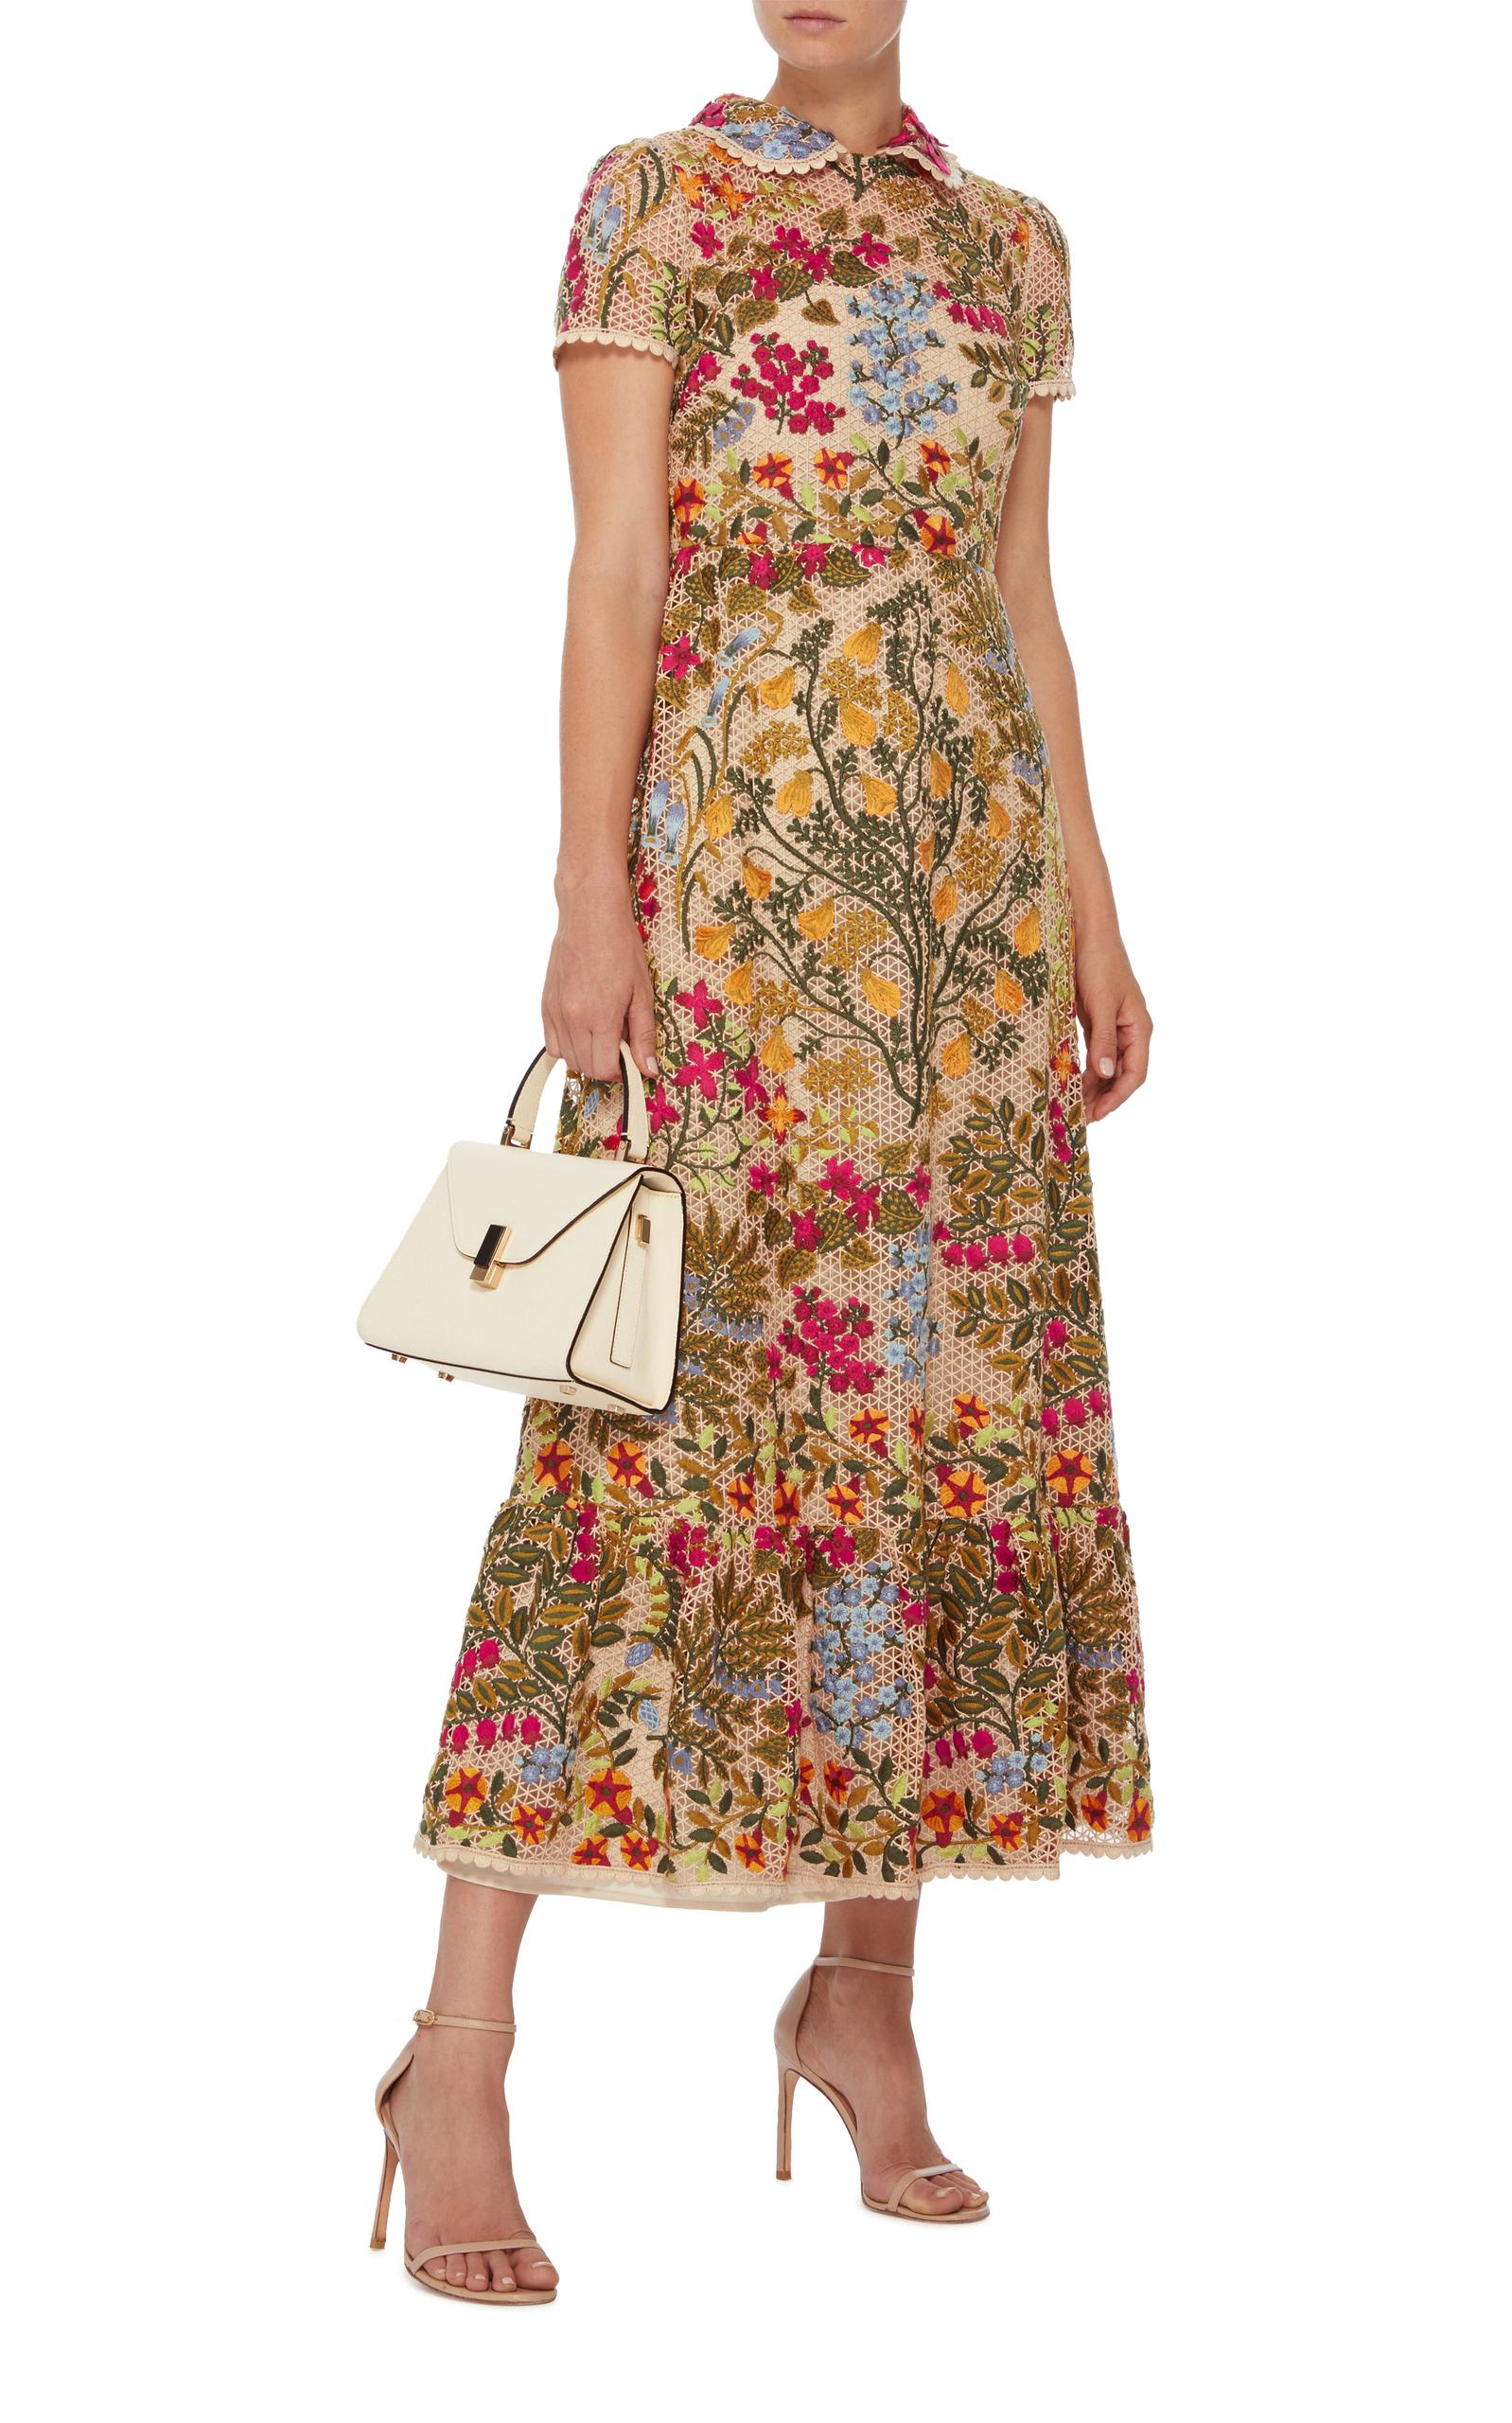 RED Valentino Floral Embroidered Macramé Dress | Lyst